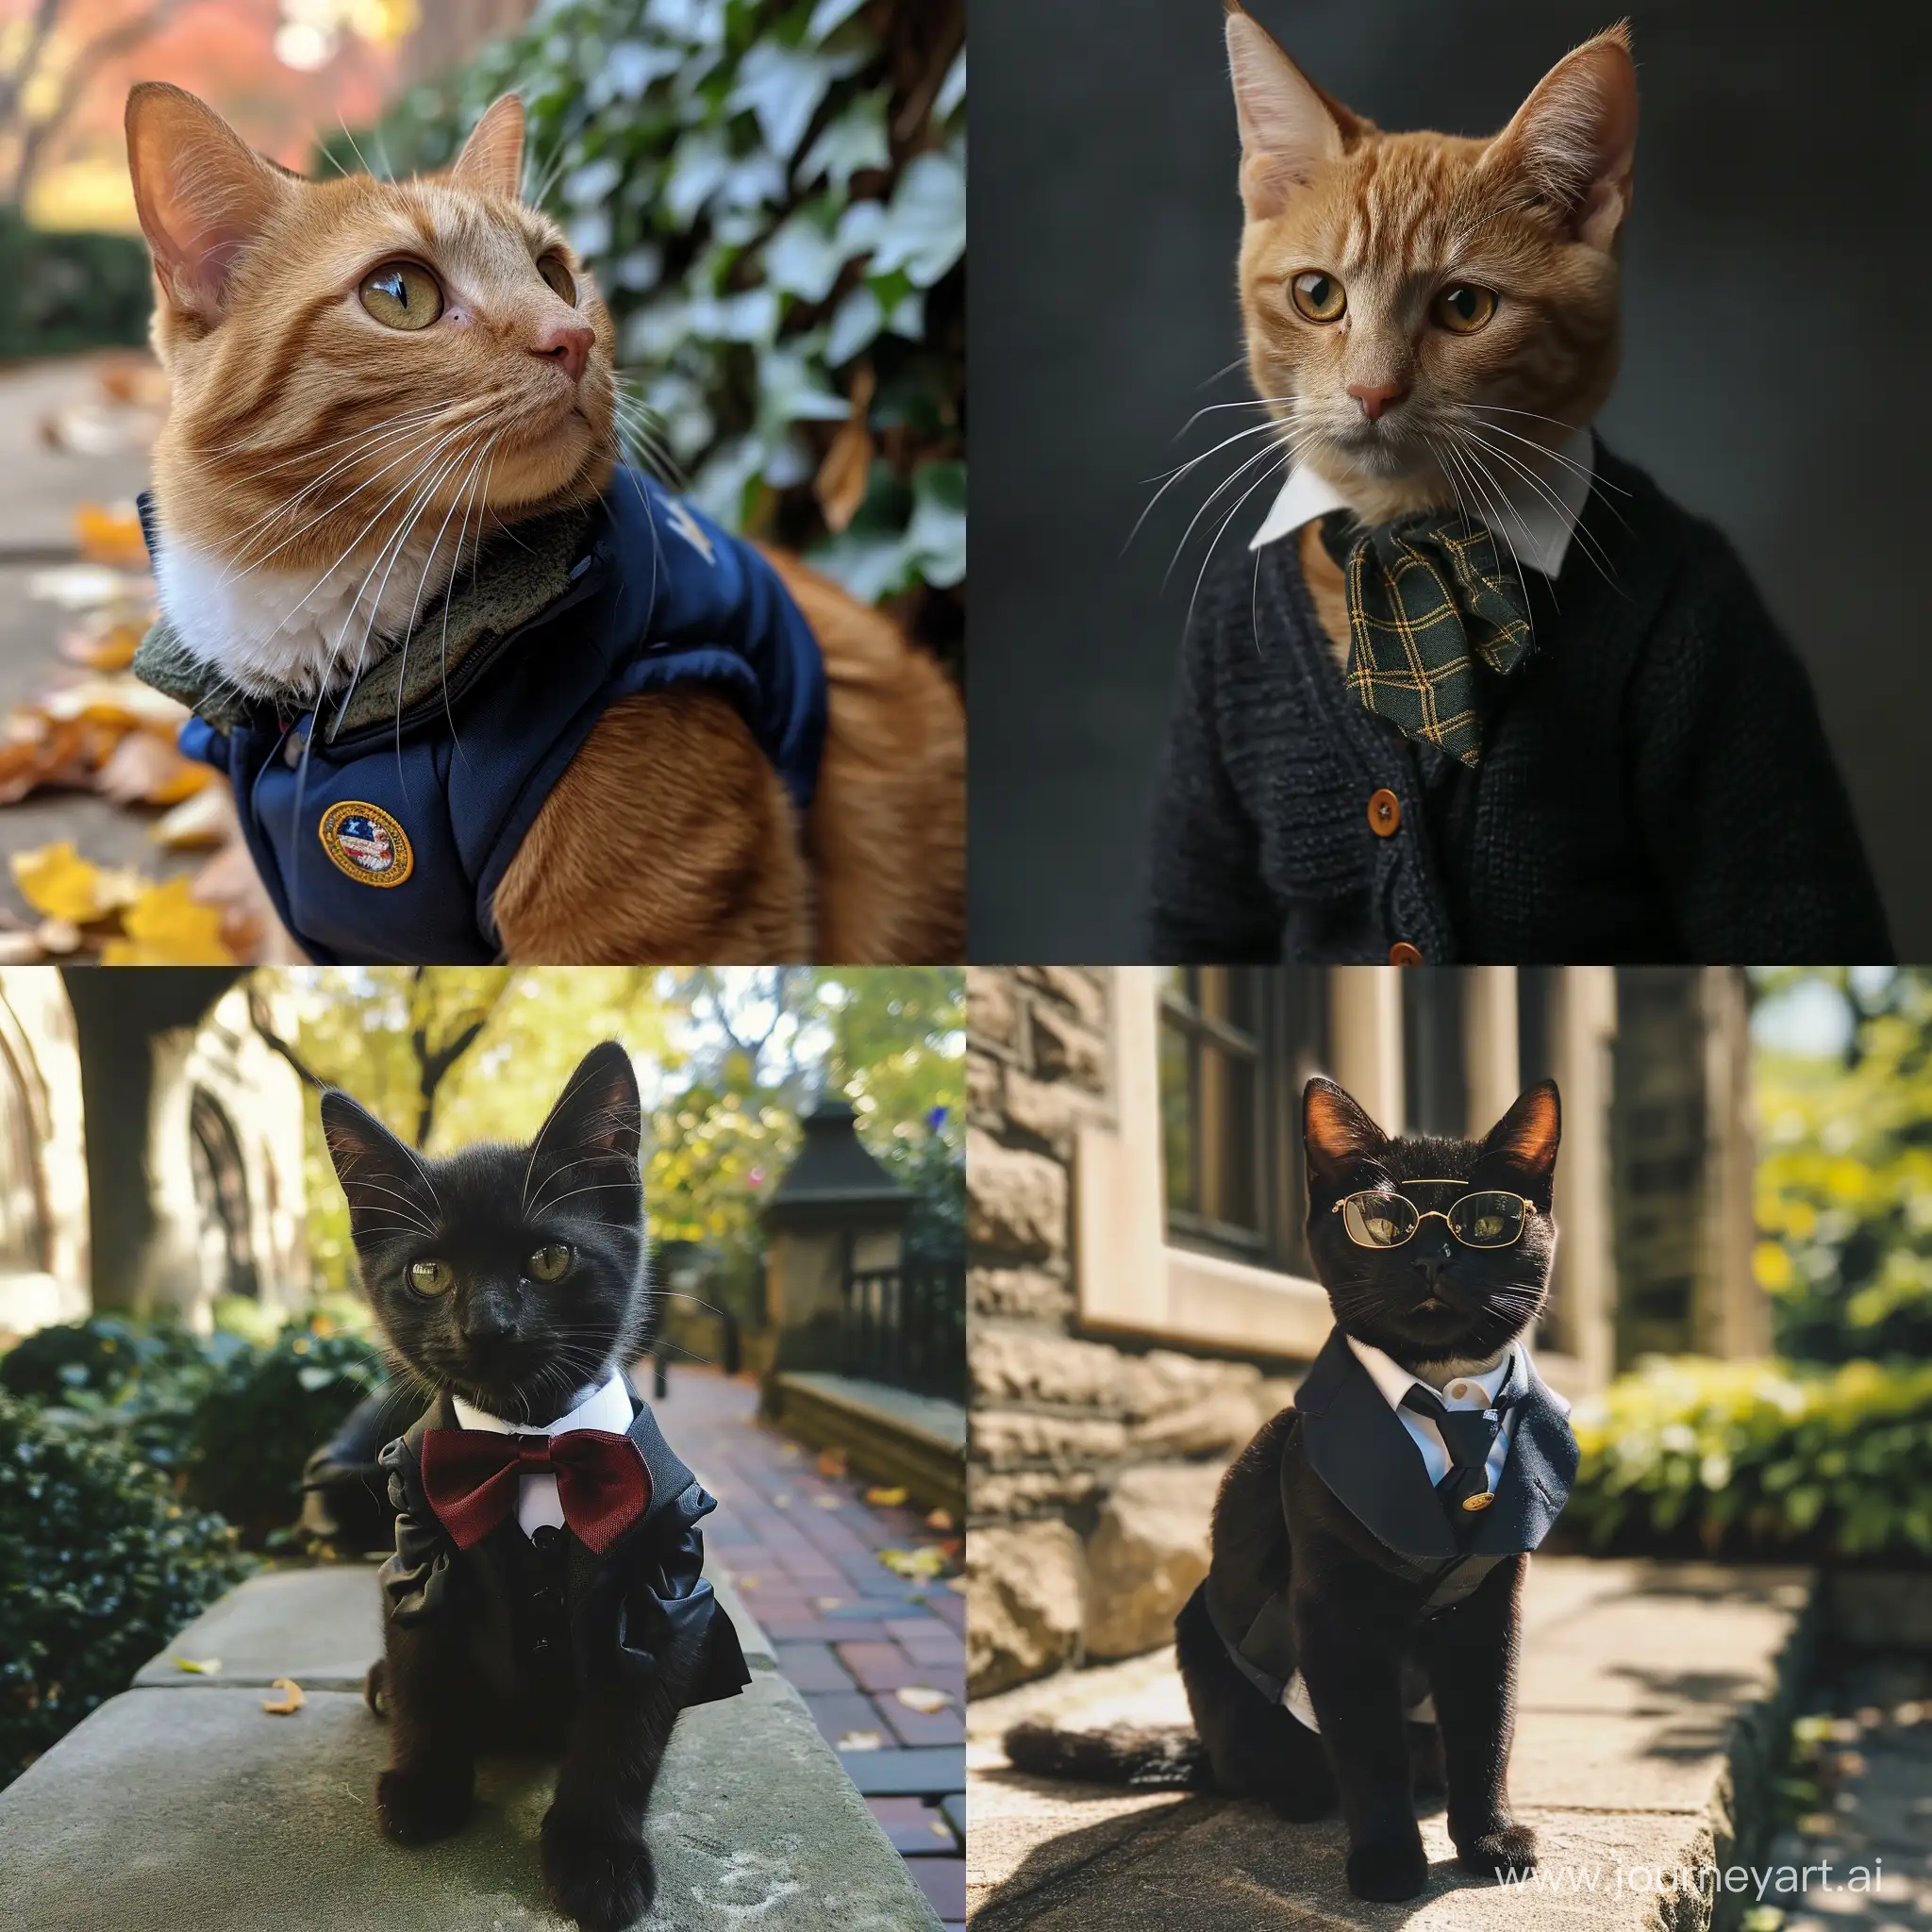 Ivy-League-Cat-Wearing-Sophisticated-Outfit